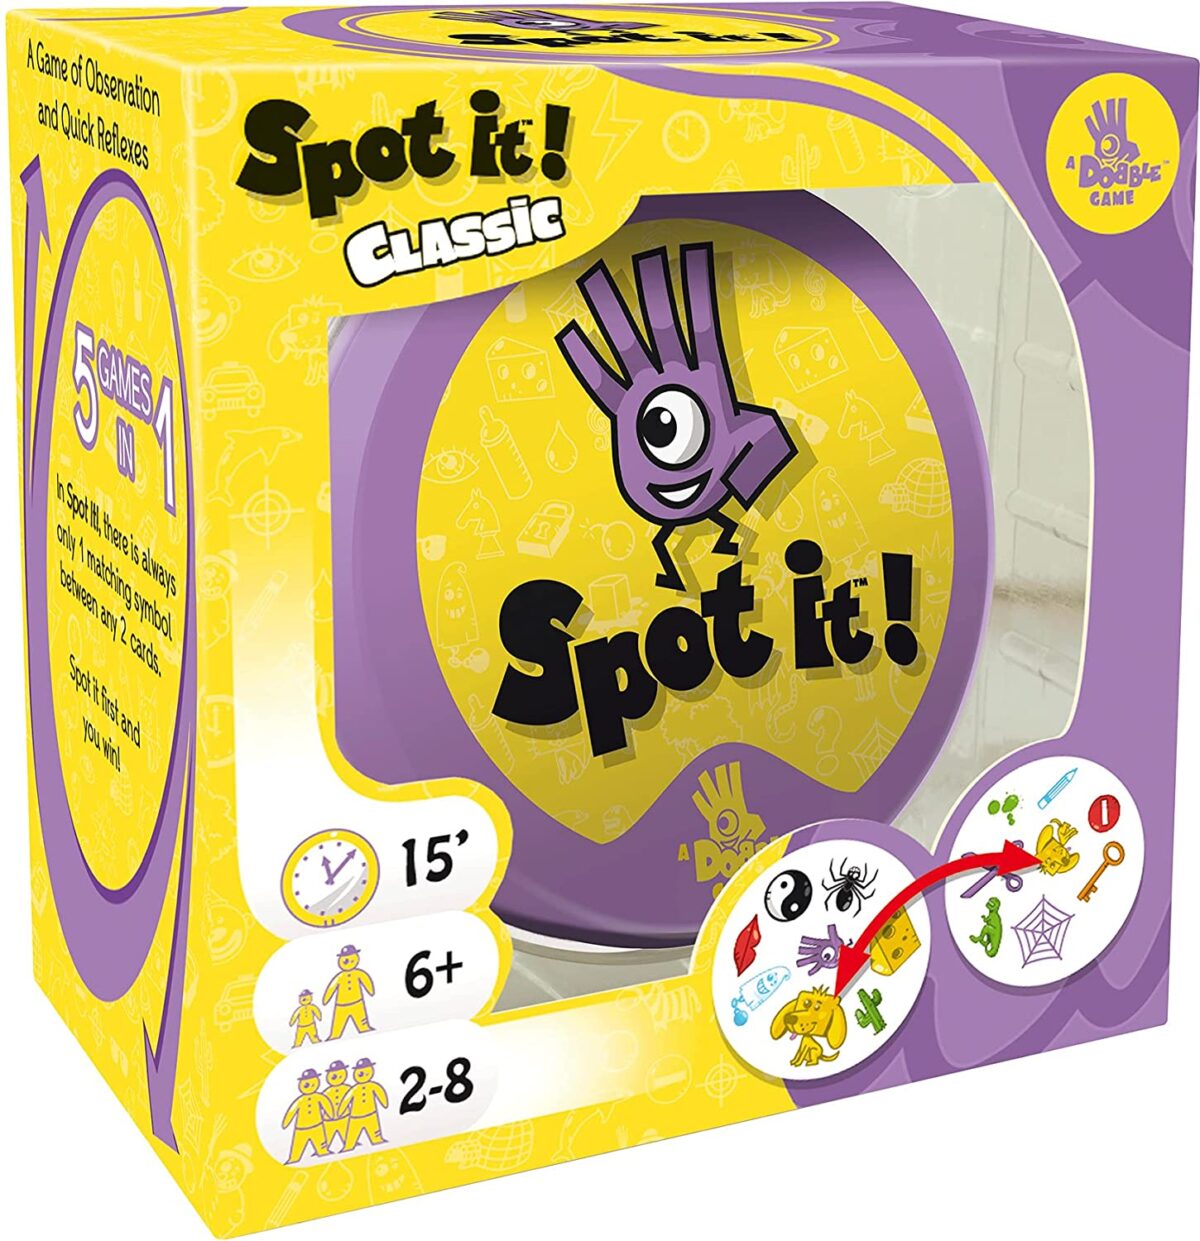 A two-player card game called Spot it! | The Dating Divas